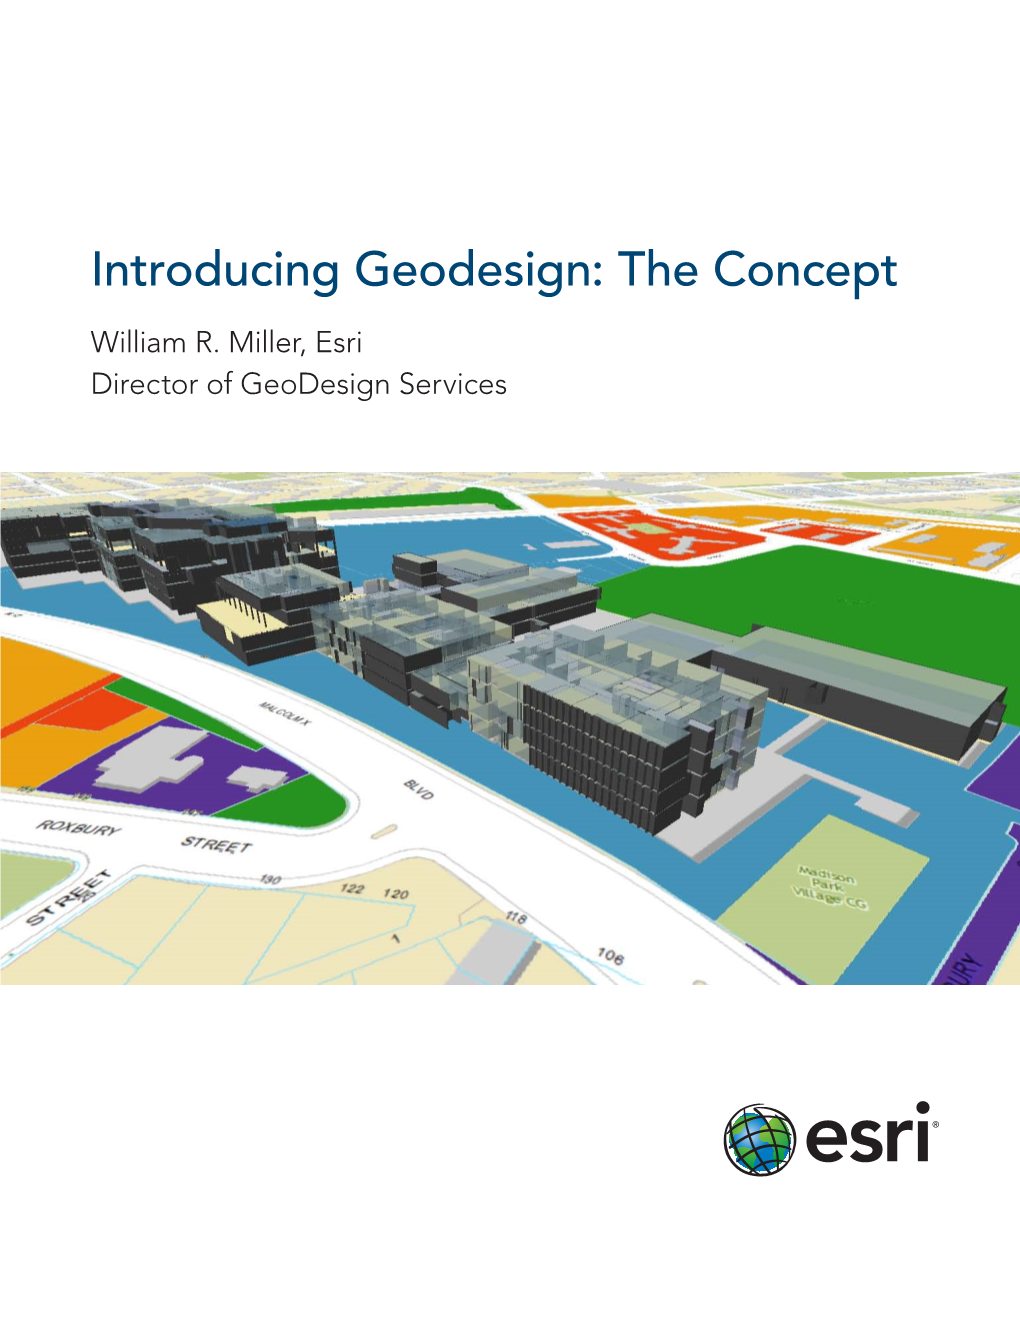 Introducing Geodesign: the Concept